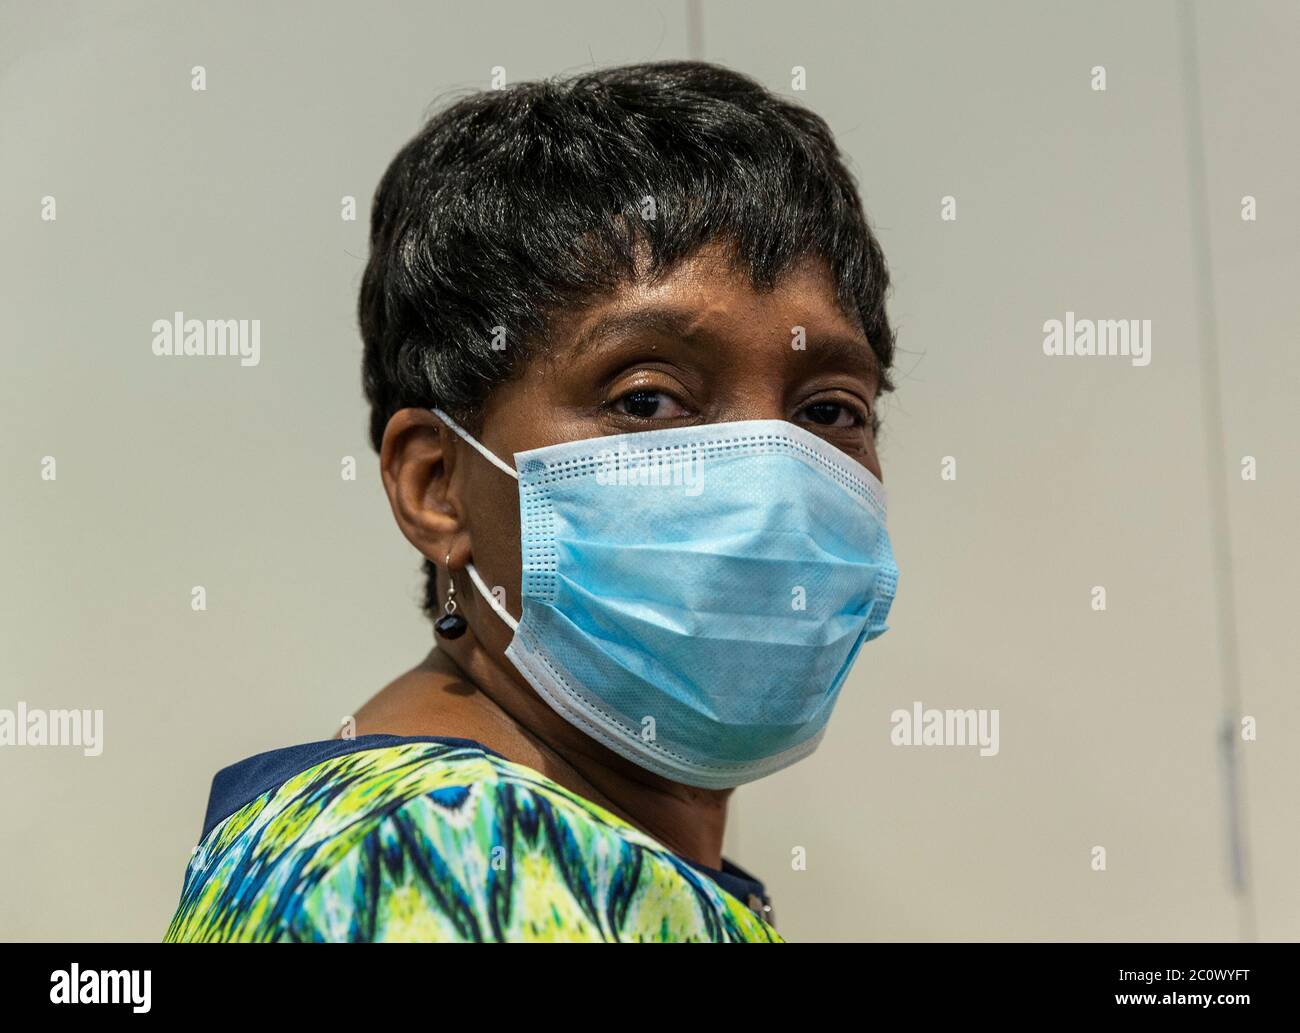 New York, United States. 12th June, 2020. Valerie Bell attends Governor Andrew Cuomo signing 'Say Their Name' police reform agenda package at office on 633 3rd Avenue (Photo by Lev Radin/Pacific Press) Credit: Pacific Press Agency/Alamy Live News Stock Photo